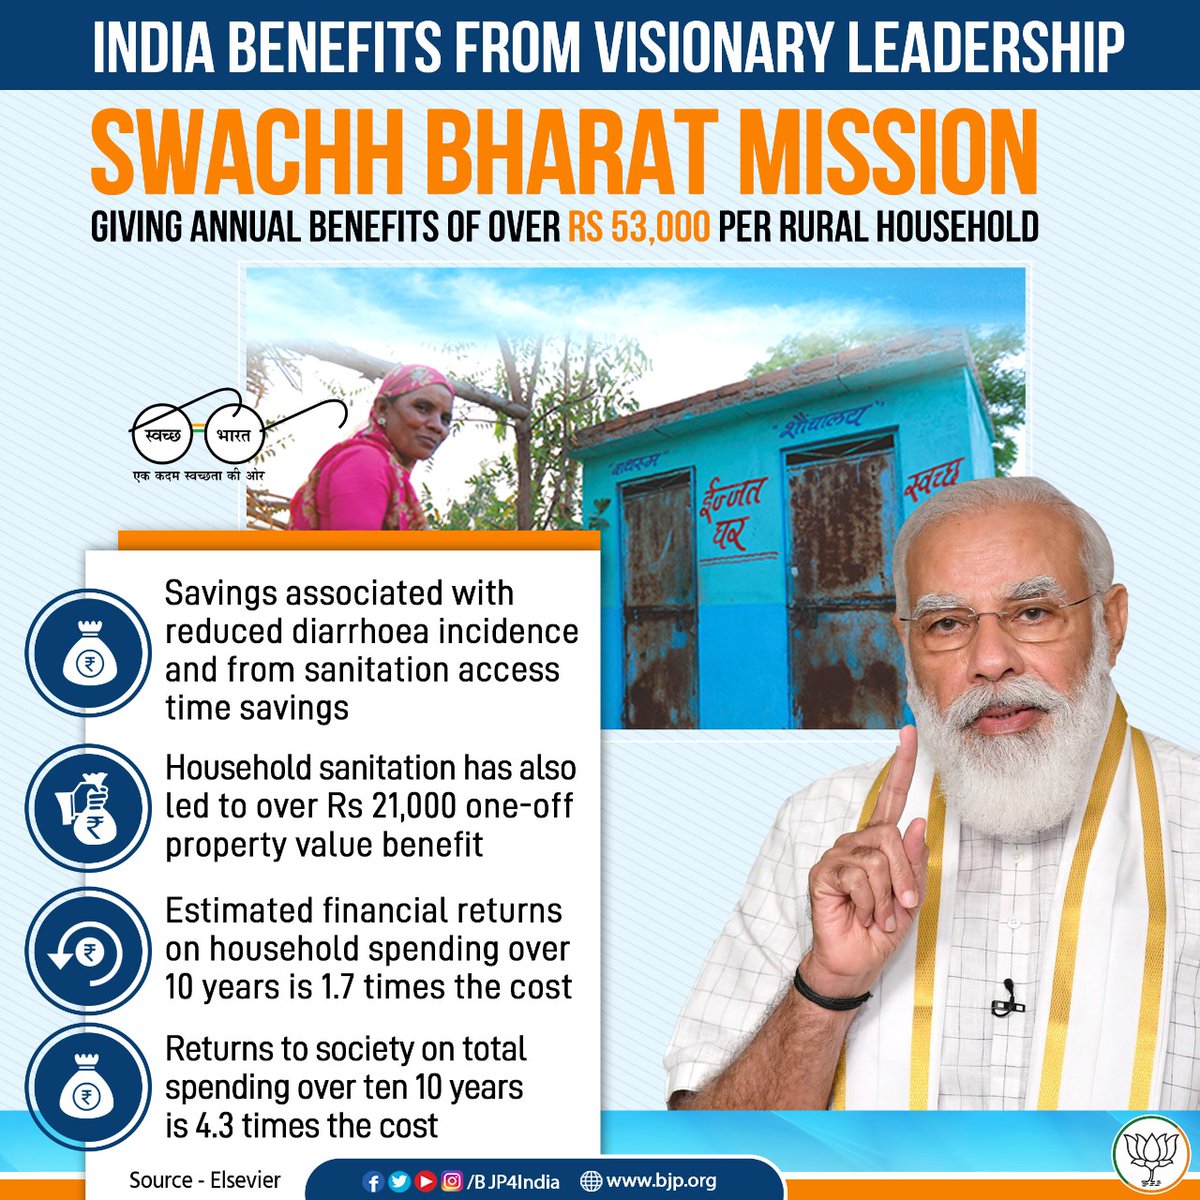 BJP4India: The societal benefits of #SwachchBharatMission are invaluable.

Apart from hygiene and sanitation, it has ensured dignity for the marginalised, especially the women in rural India.

Here’s a study establishing that the mission is giving annual…